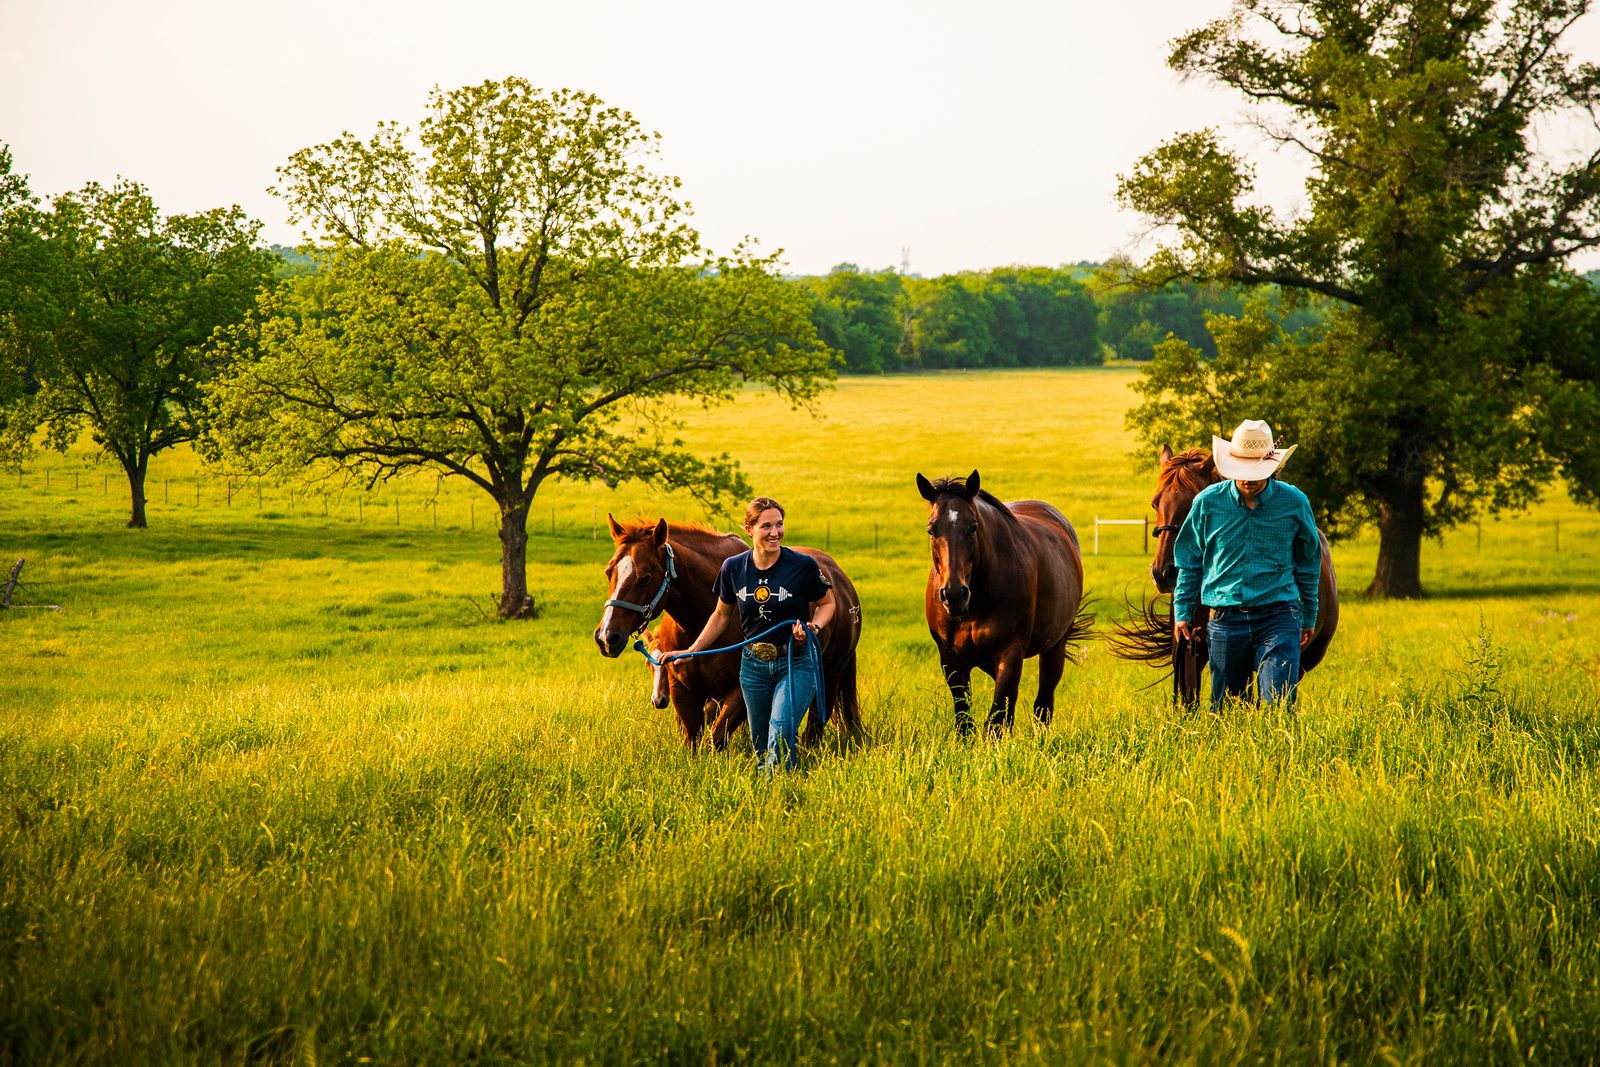 A female and male guiding horses in the pasture.